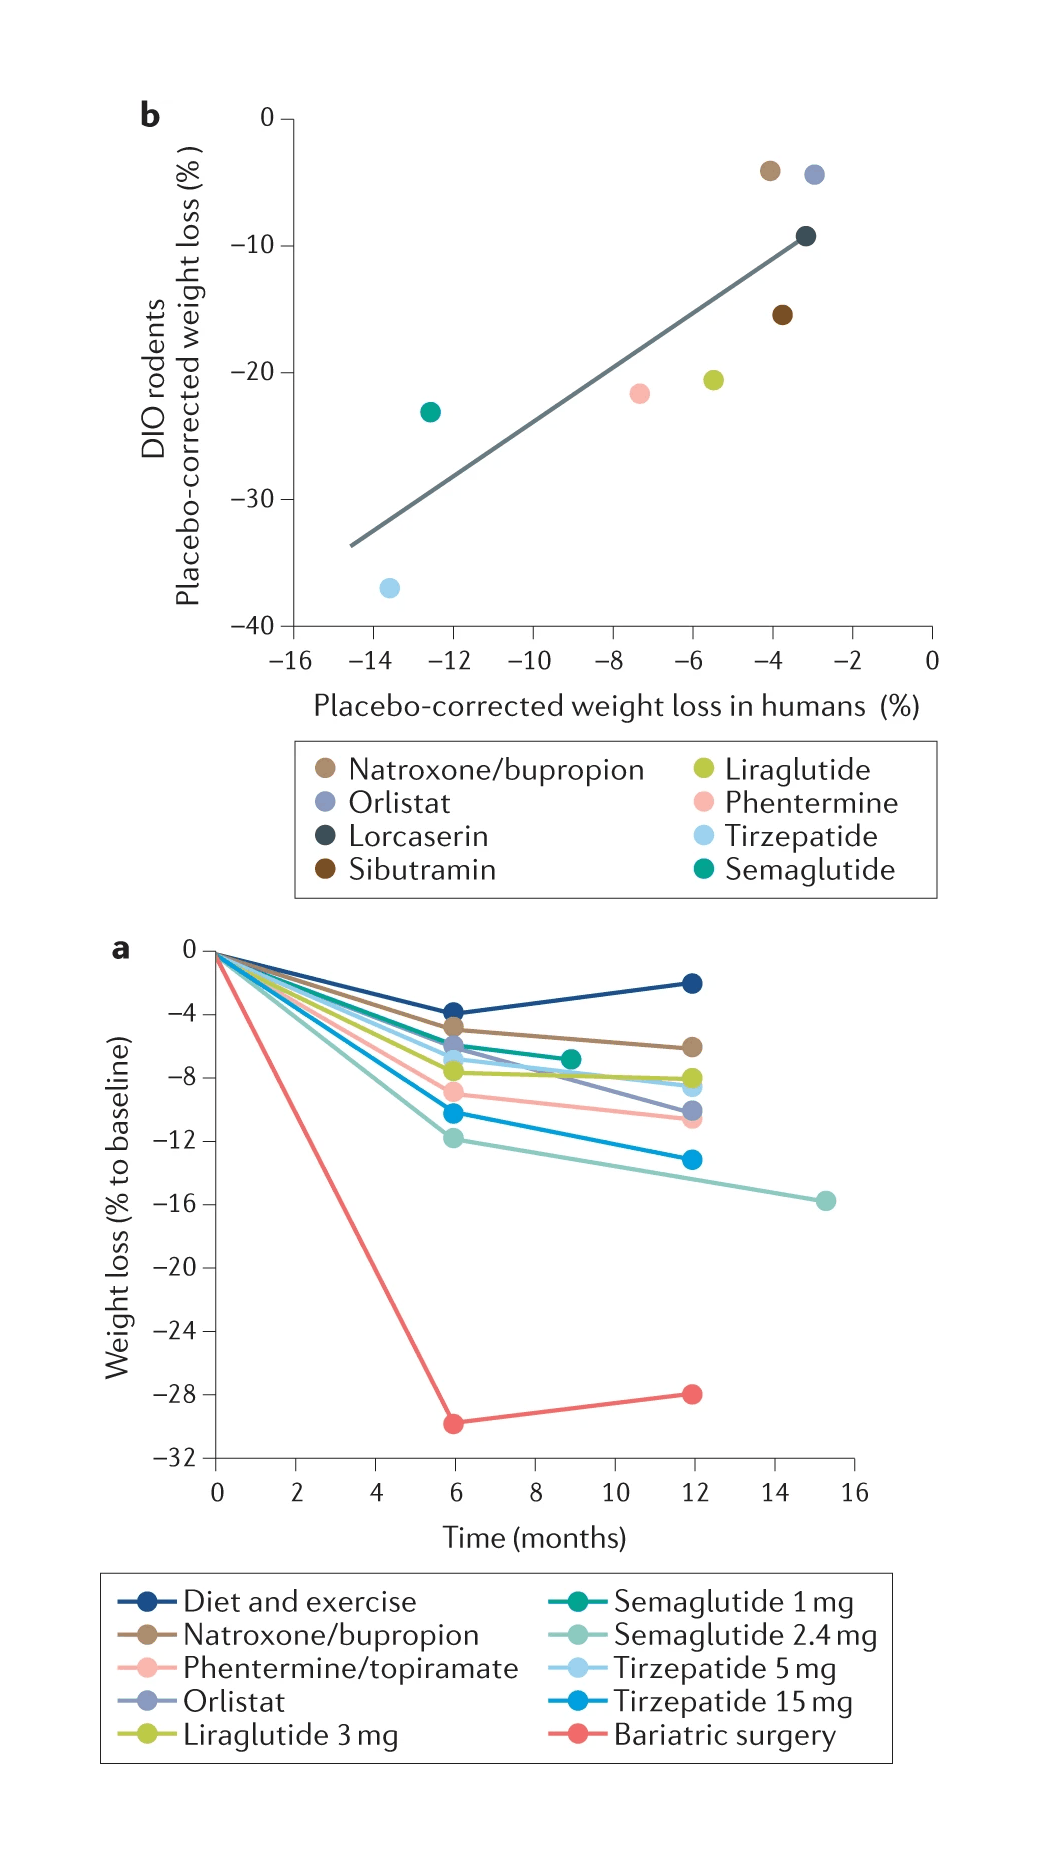 Figure 3: Body weight loss by AOMs in humans and rodents. Body weight loss achieved through lifestyle changes, currently approved anti-obesity medications (AOMs) and bariatric surgery (part a) and correlation of drug-induced body weight loss in rodents and humans (part b). Data in panel a refer to liraglutide, orlistat, naltrexone/​​bupropion, phentermine/​​topiramate, semaglutide 1 mg, semaglutide 2.4 mg, and tirzepatide (5 and 15 mg). Data in panel b refer to naltrexone/​​bupropion, orlistat, lorcaserin, sibutramine, liraglutide, phentermine, semaglutide, and tirzepatide.